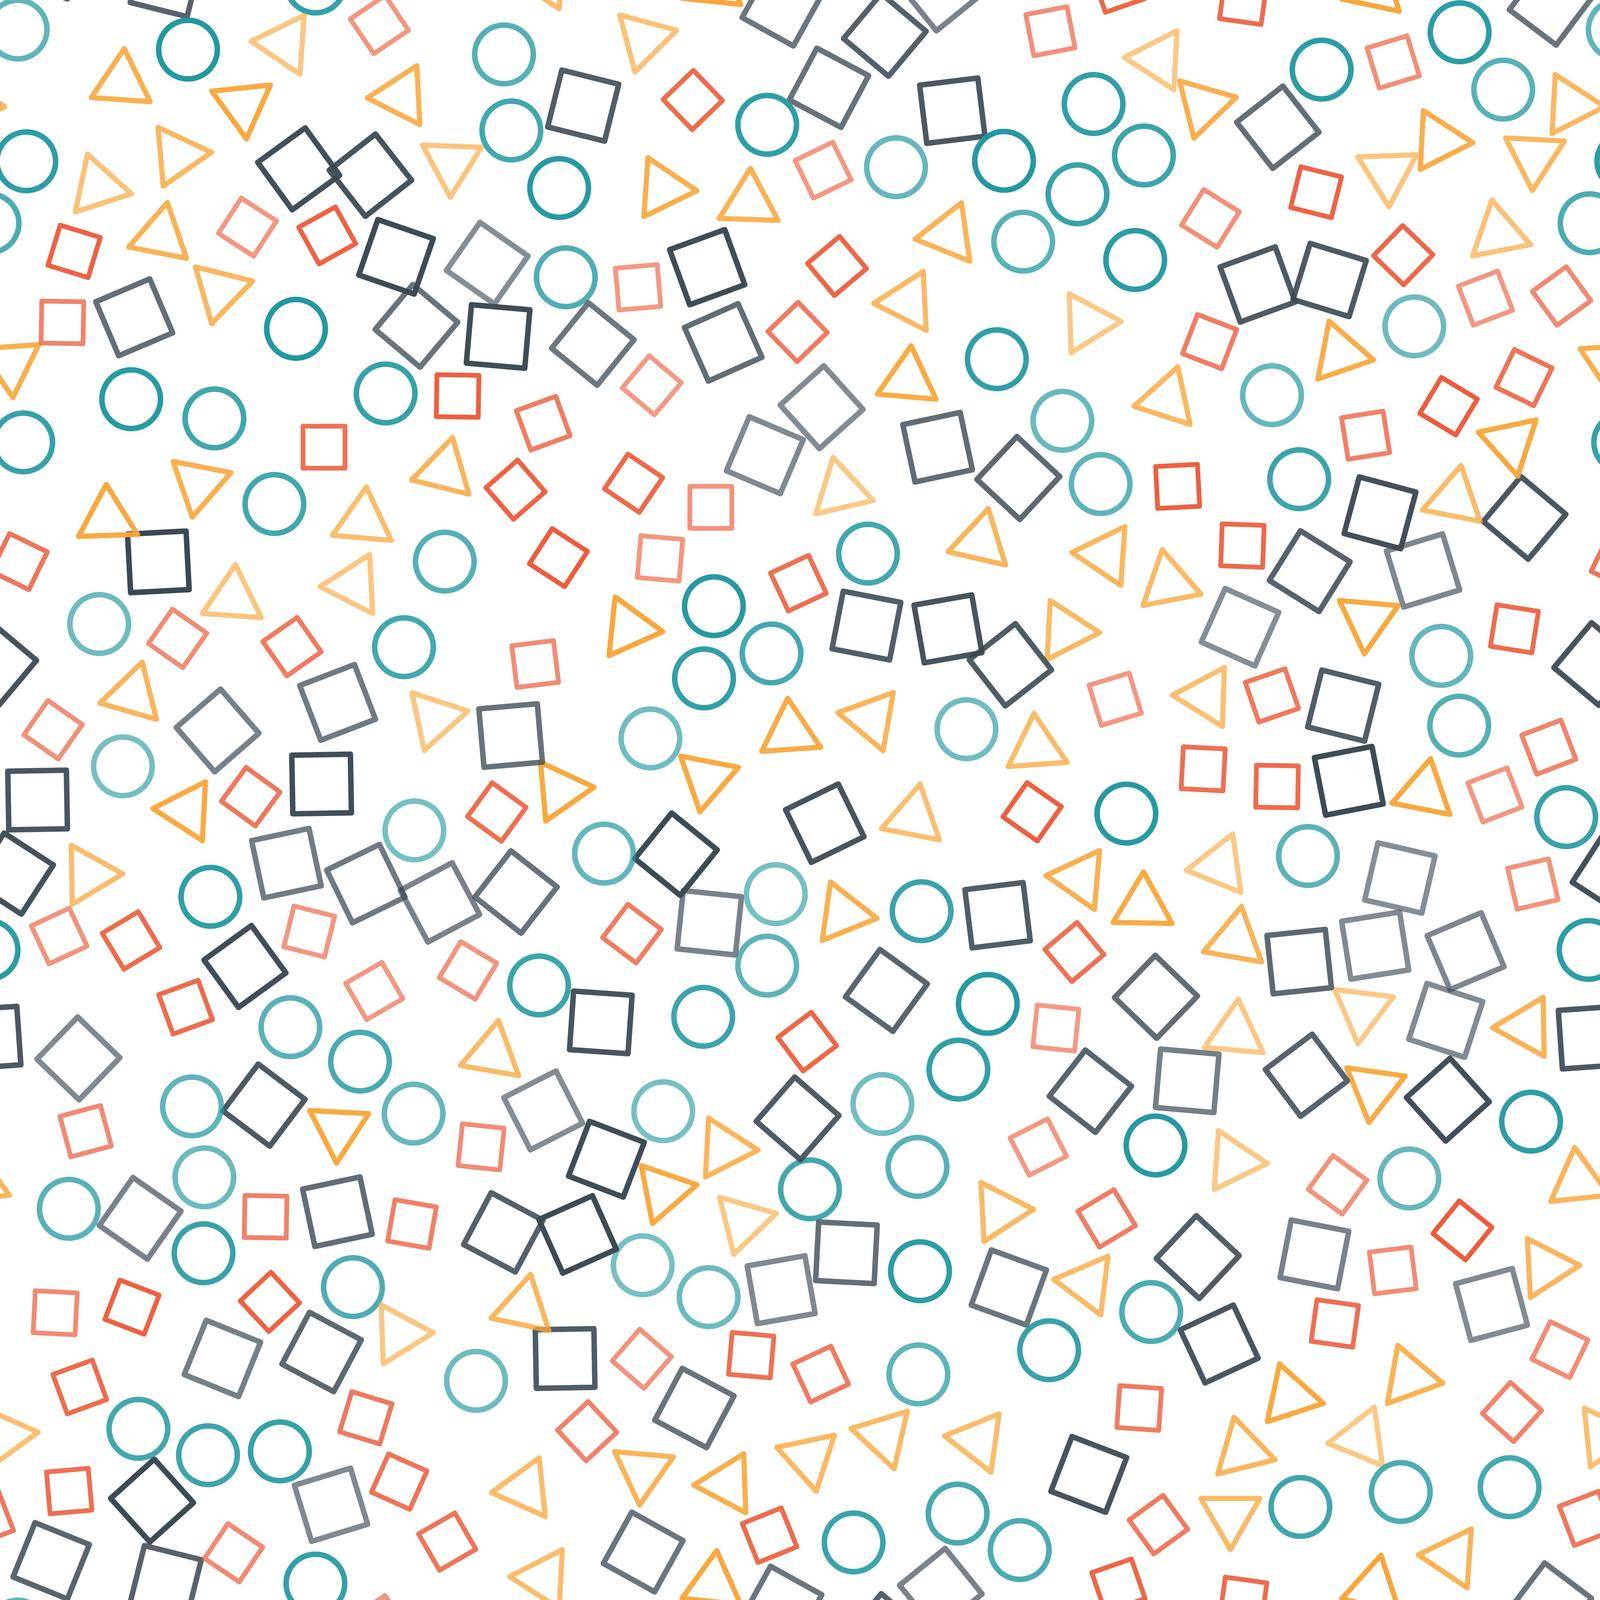 Abstract geometric background with different geometric shapes - triangles, circles, squares.